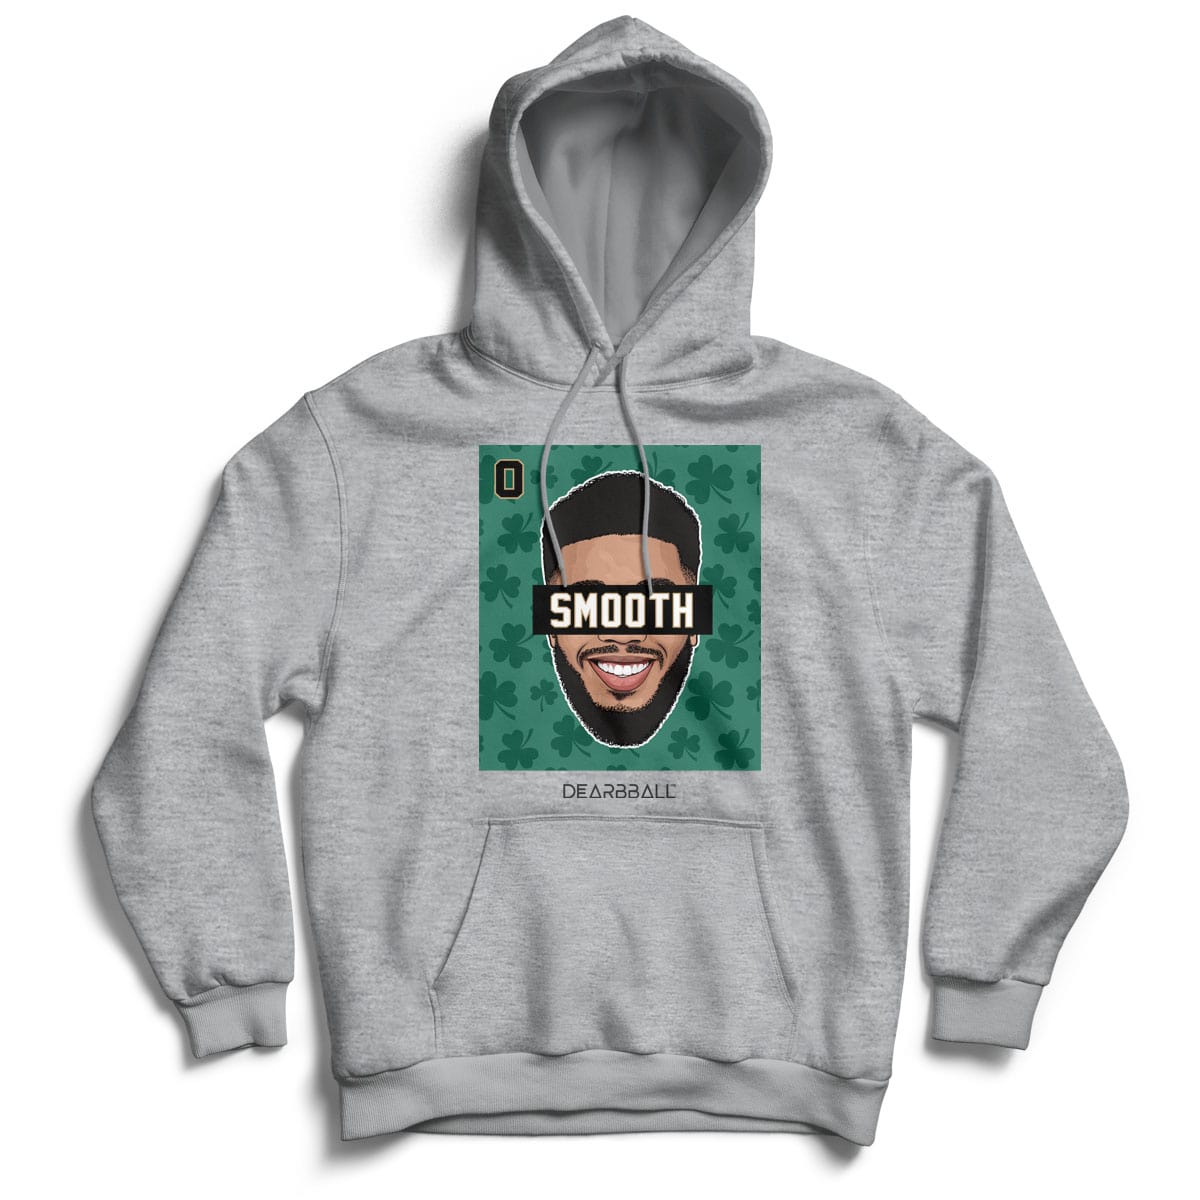 DearBBall Sweat à Capuche - SMOOTH 0 Trèfles Edition